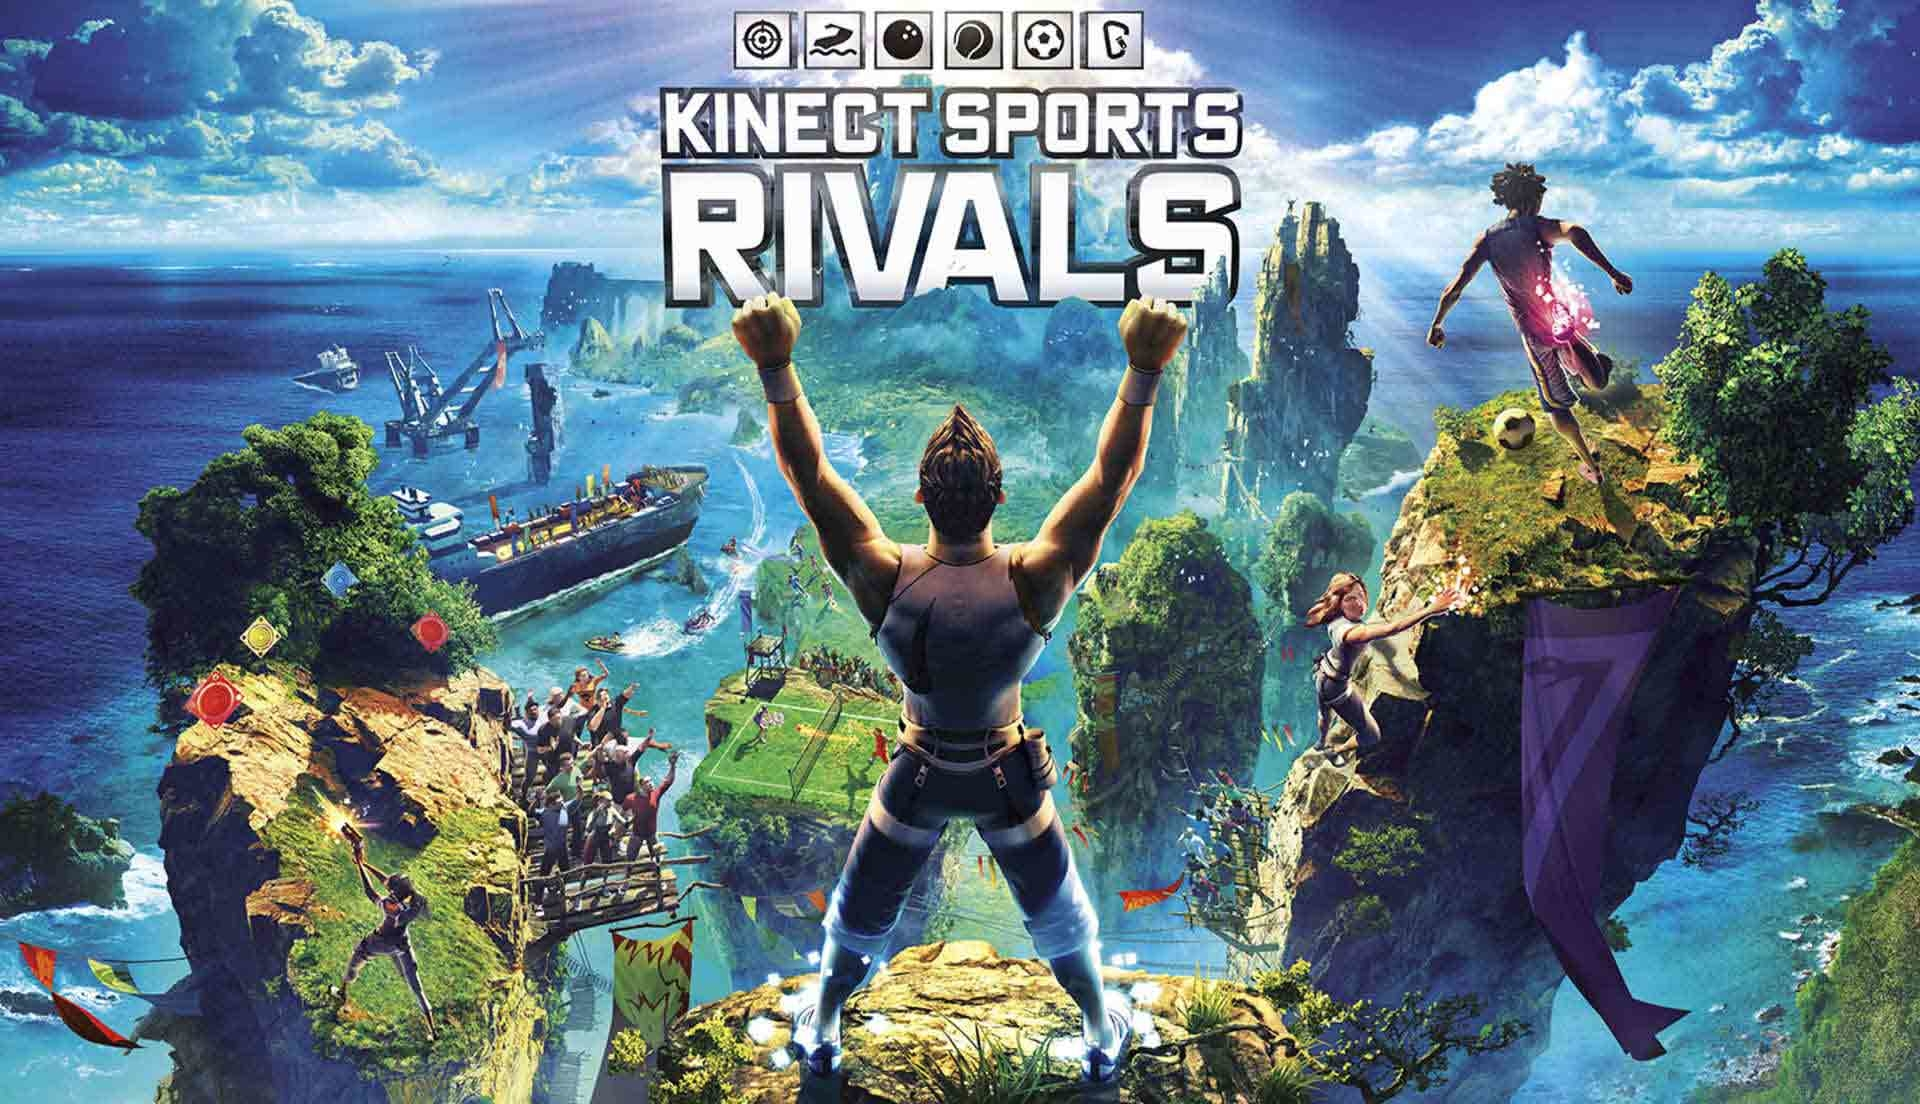 Kinect sports xbox. Kinect Sports Rivals. Kinect Sports Xbox one. Kinect Sports Rivals Xbox one обложка. Xbox one Kinect игры.